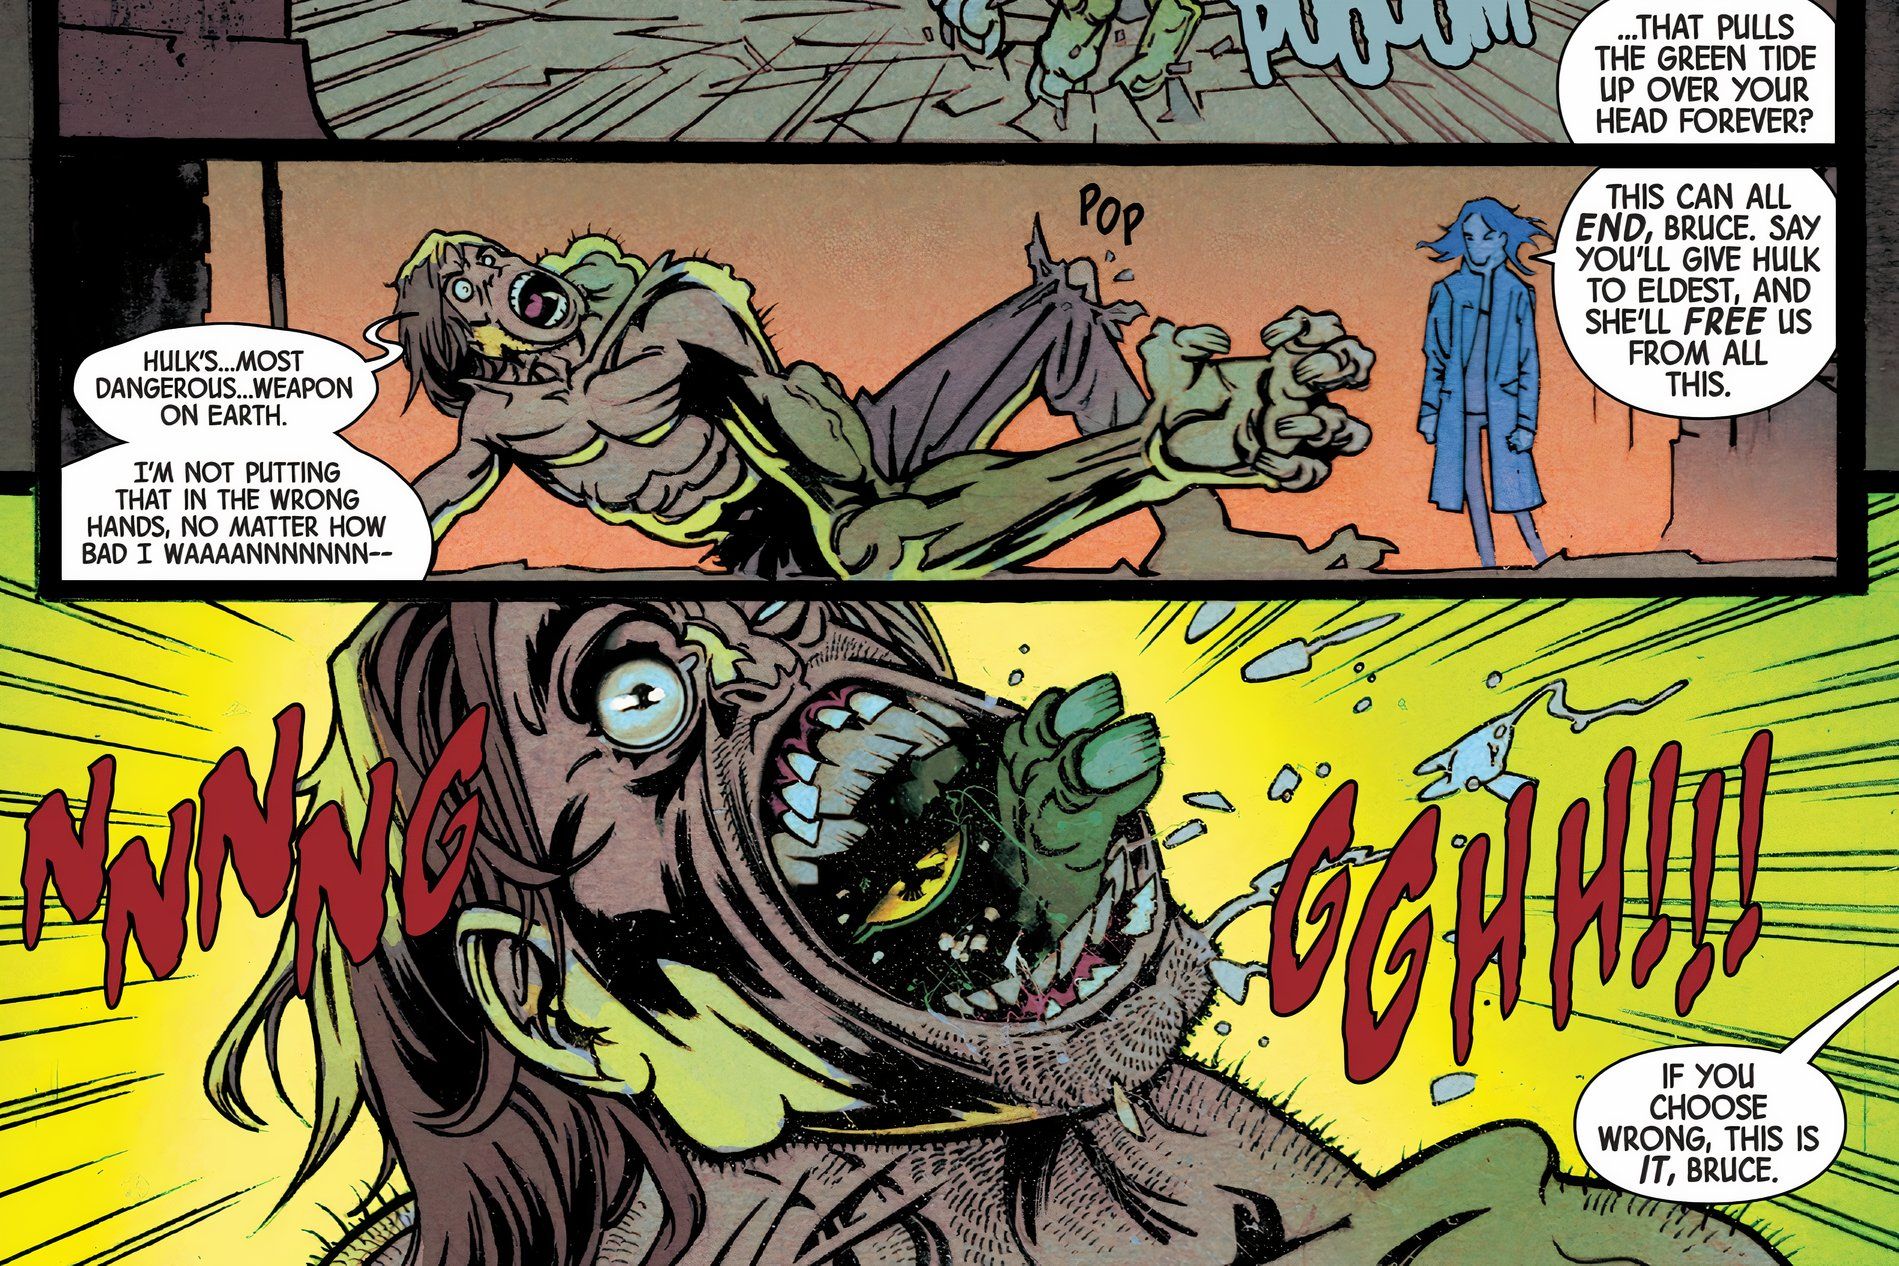 After calling out the Hulk, the creature slowly rips his way out of Bruce Banner by crawling out of his throat.